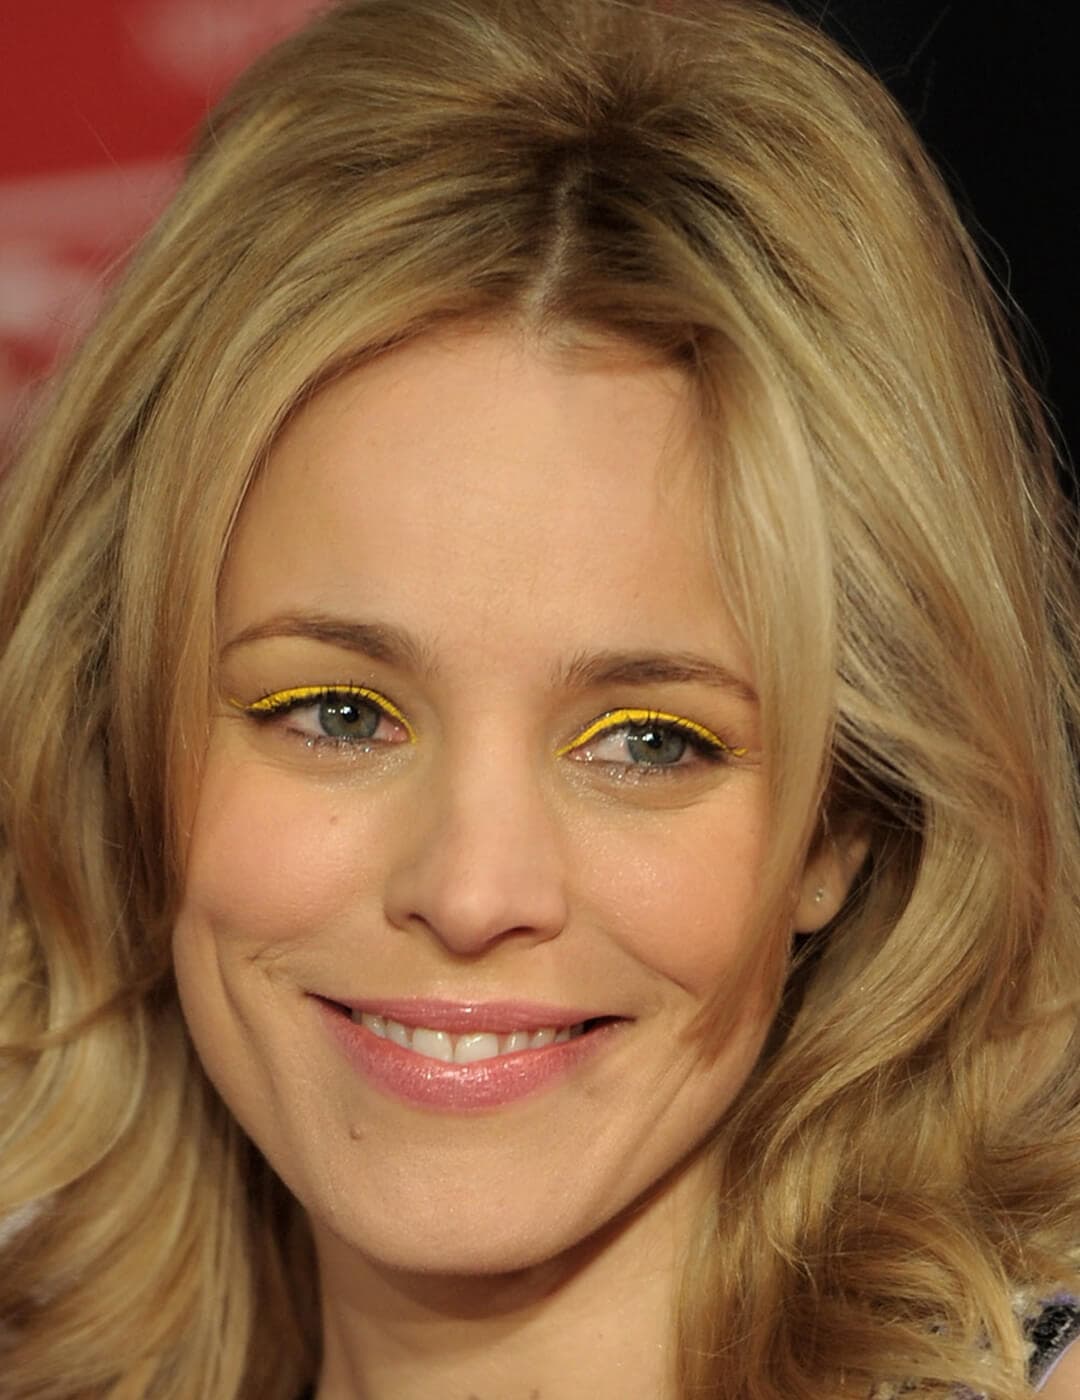 A photo of Rachel McAdams smiling in the camera with her yellow eyeshadow